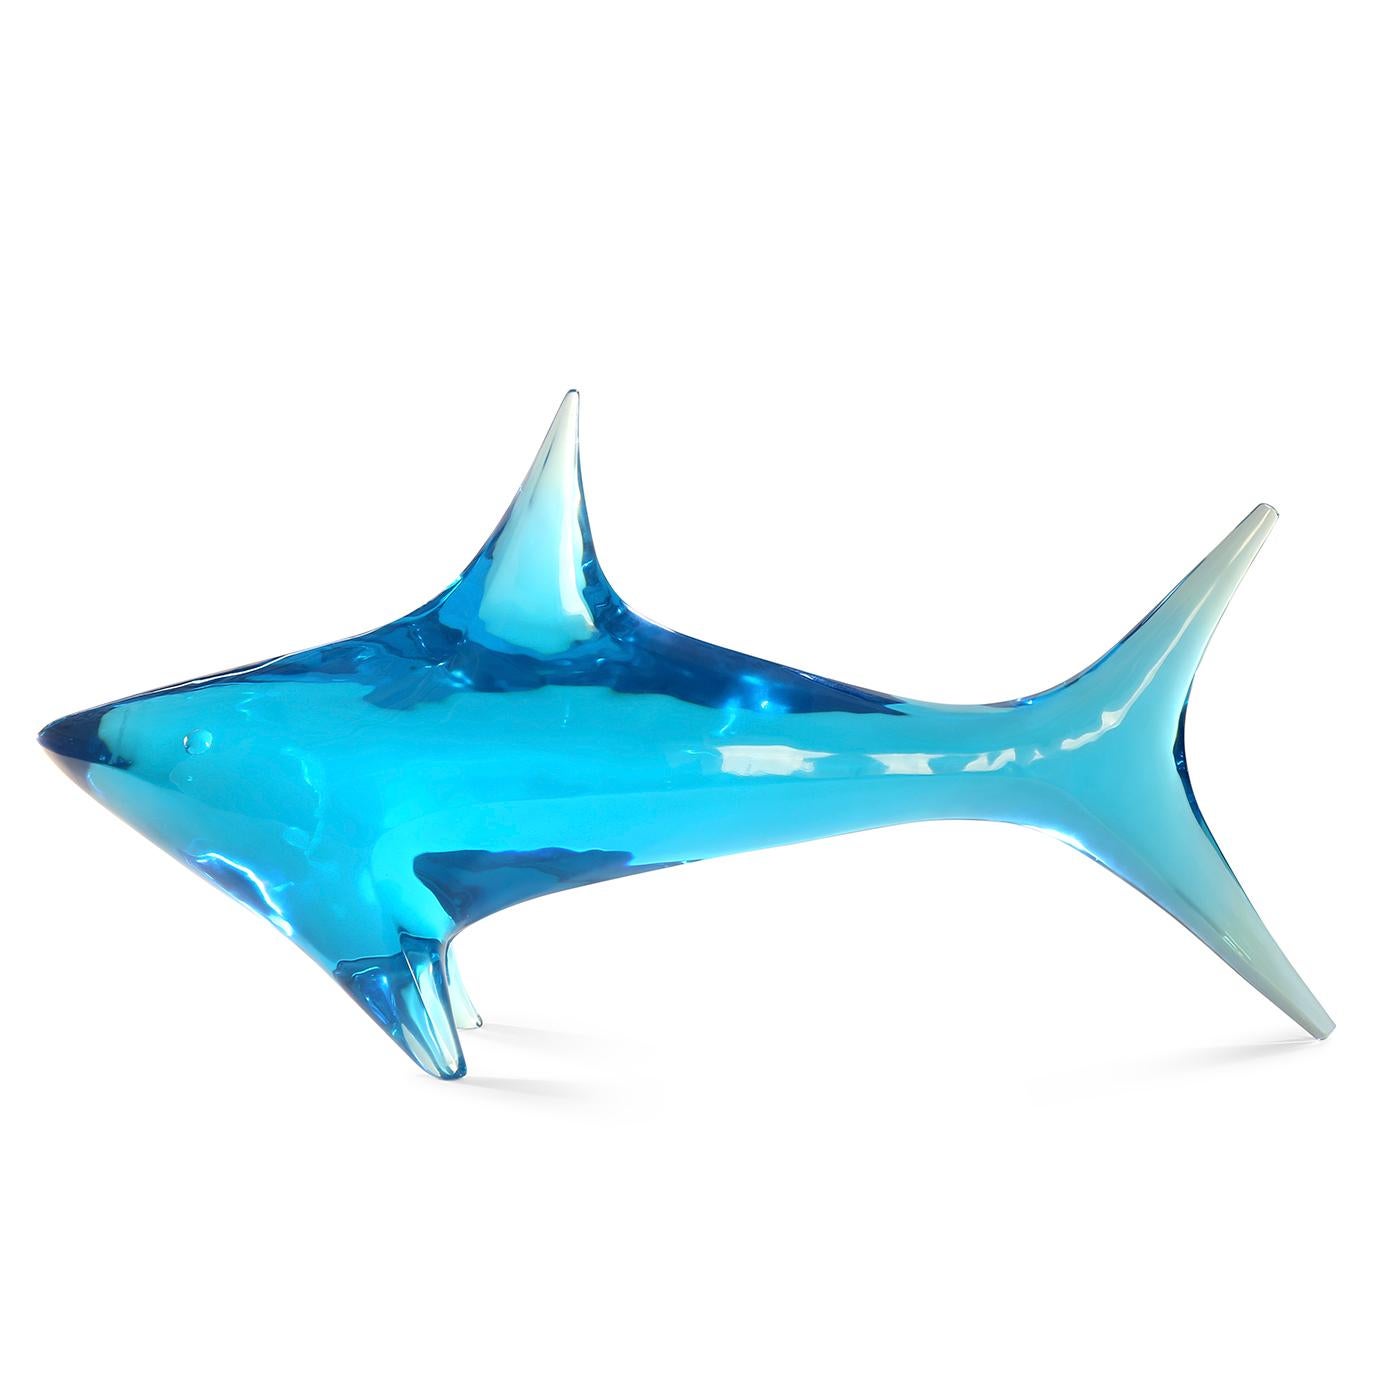 Surreal size. A mesmerizing must-have in cool blue acrylic, our Giant Shark is the definition of creature chic. It looks fab anchoring a tablescape or makes a great focal point in an unused fireplace.

Our oversized acrylic sculptures start their